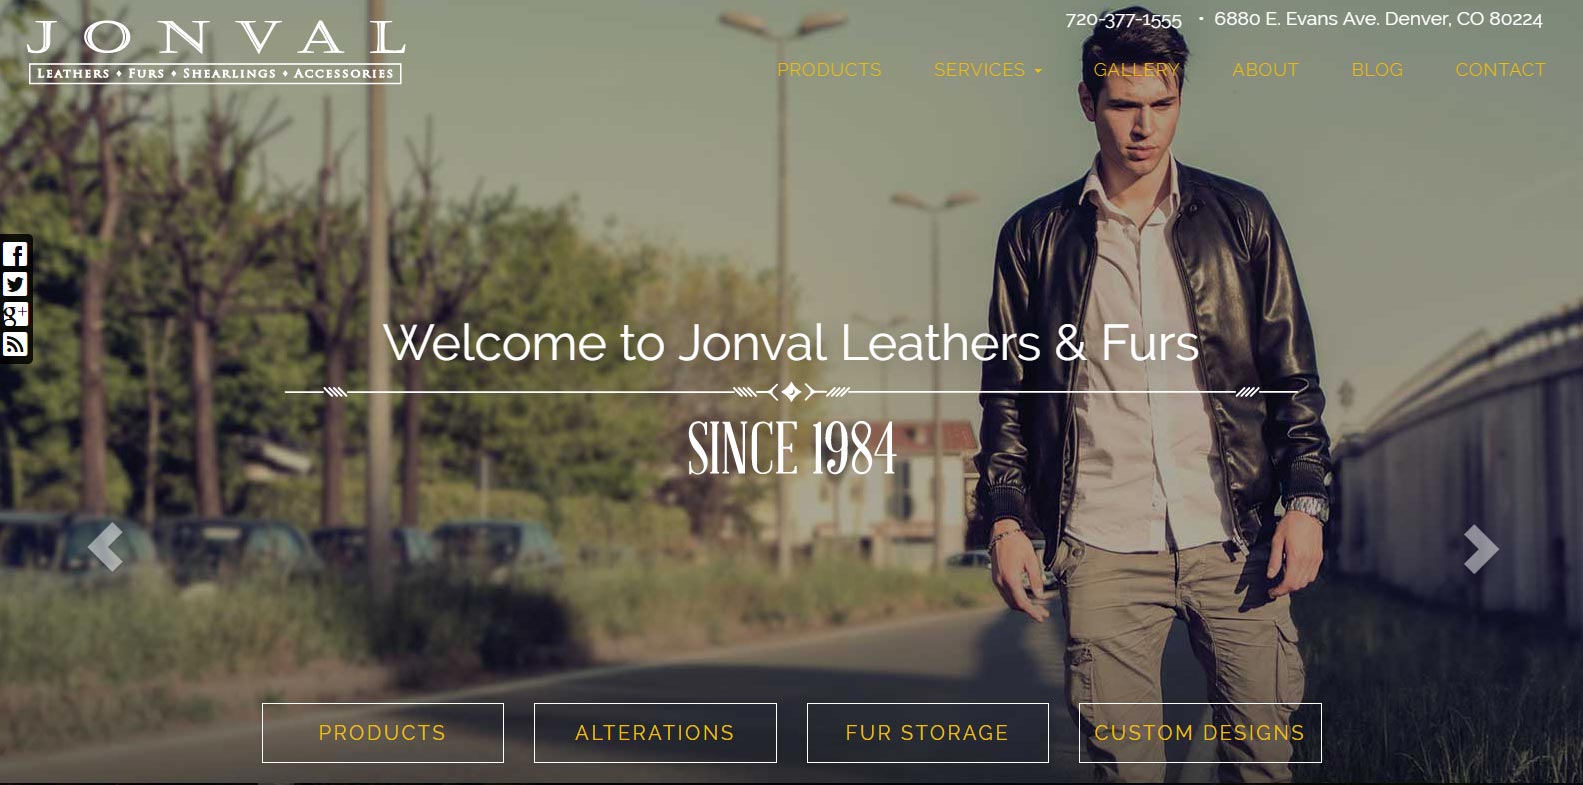 
Site Upgrade Launched: Jonval Leather